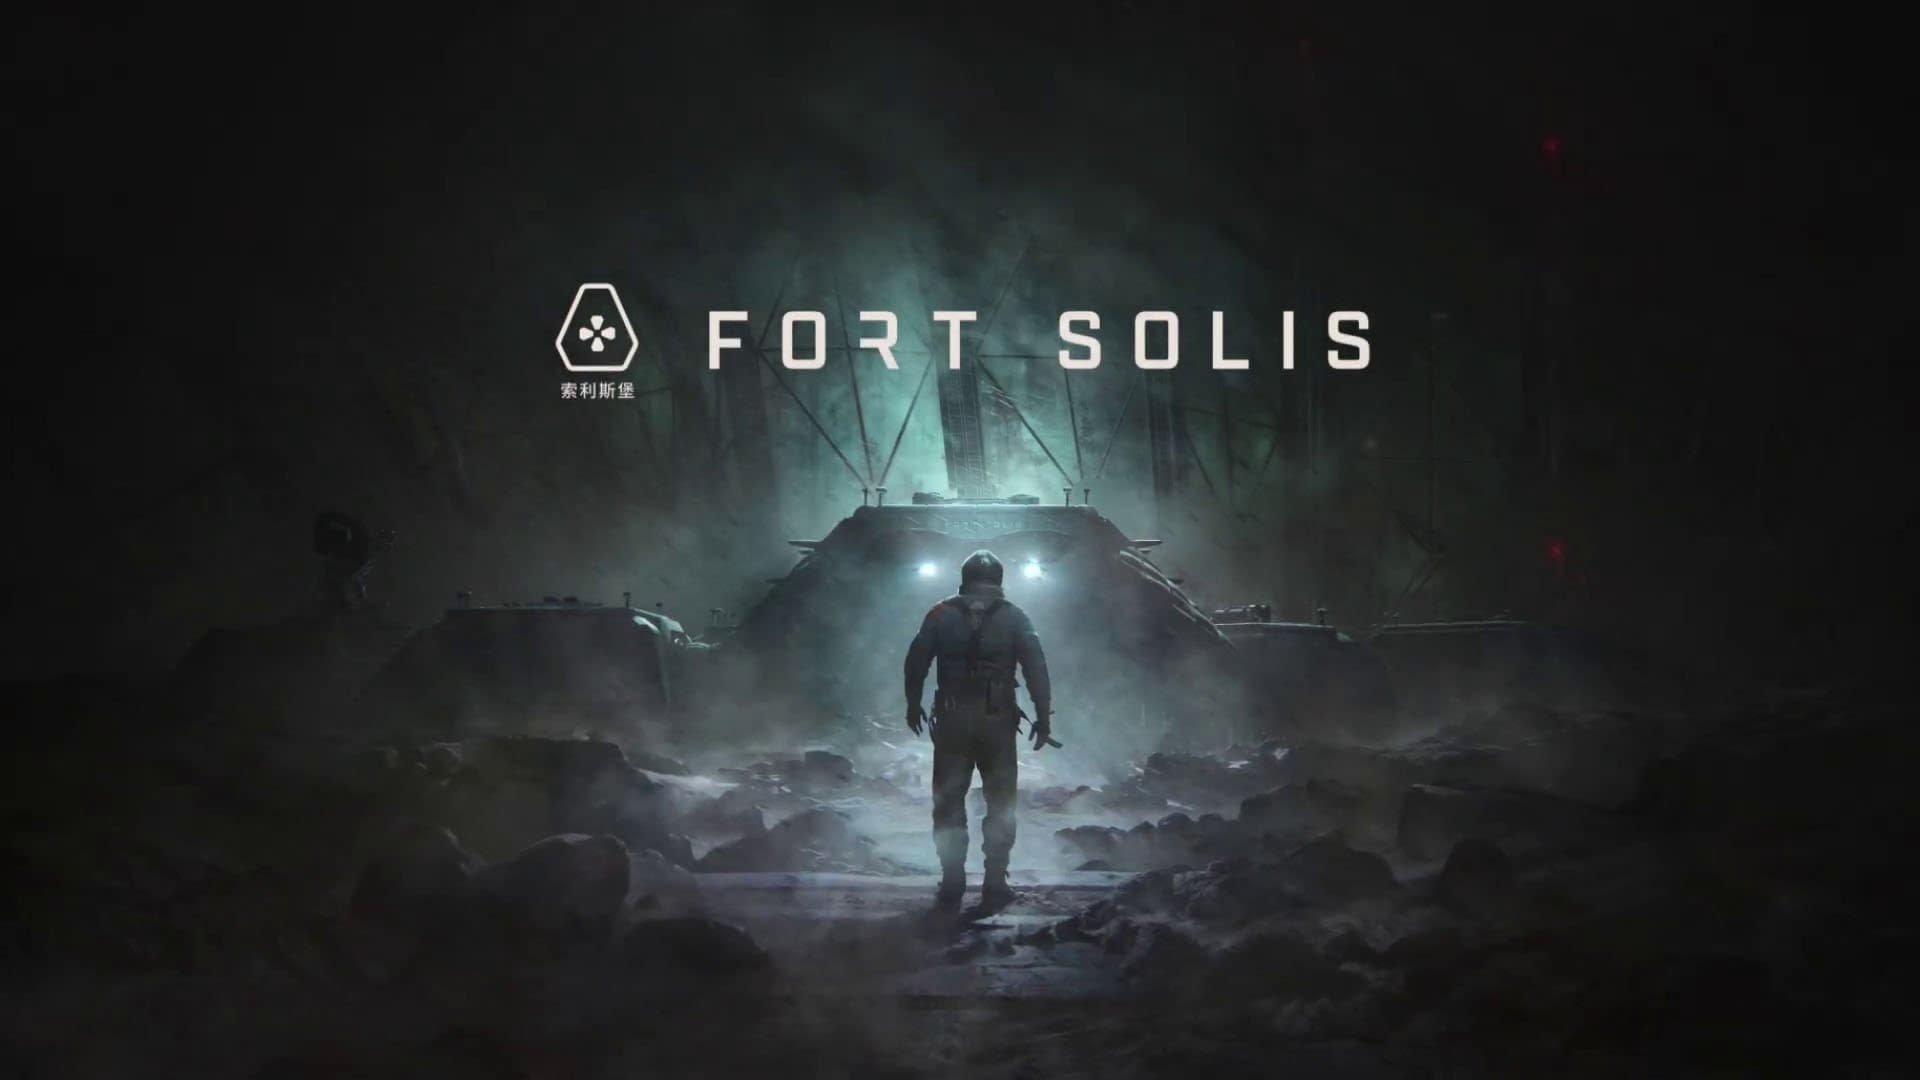 Science fiction voltage game released the play trailer for Fort Solis